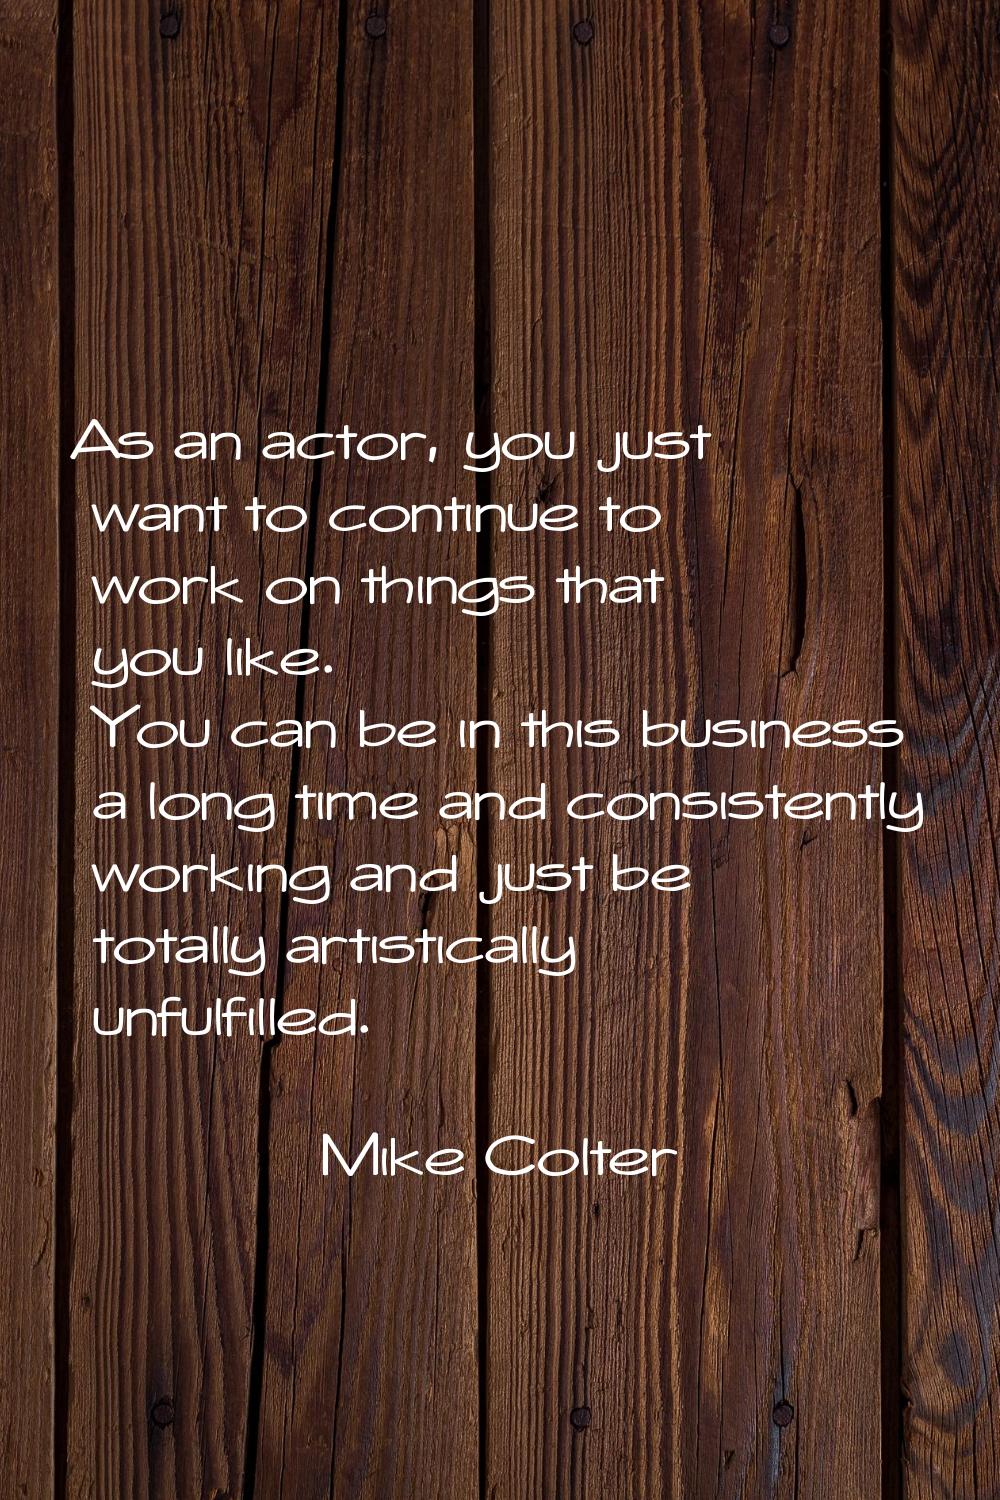 As an actor, you just want to continue to work on things that you like. You can be in this business